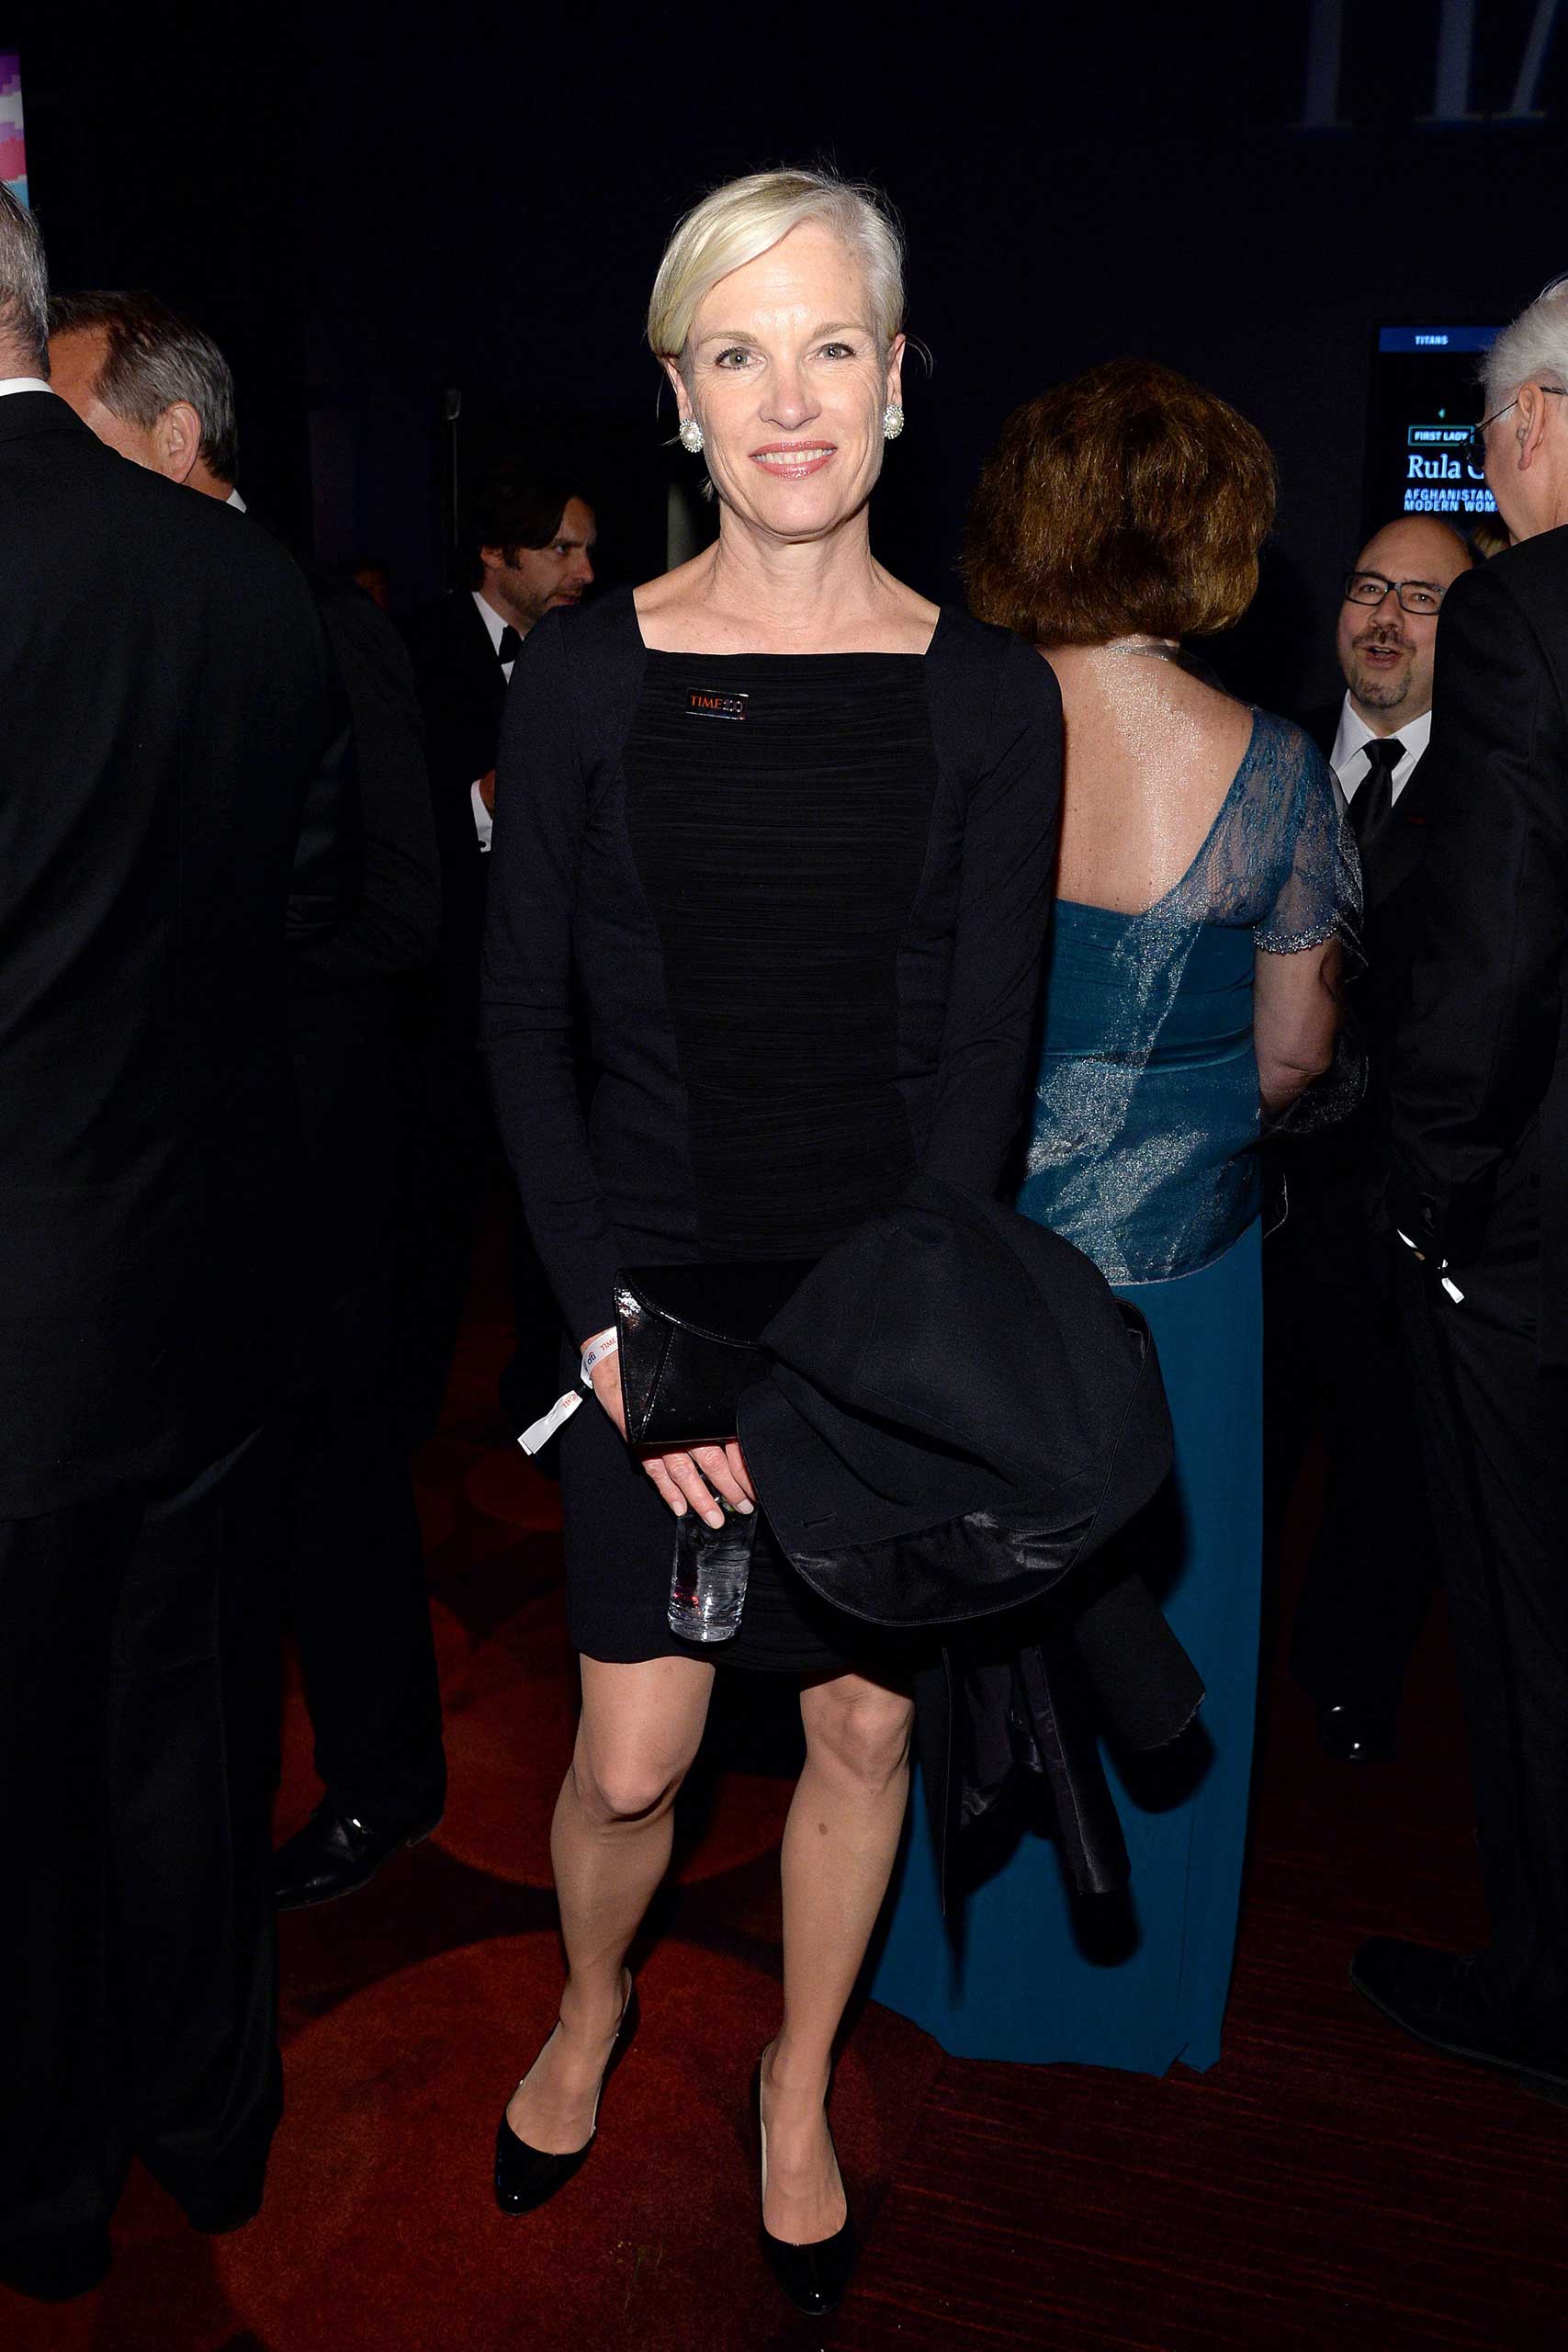 Cecile Richards attends the Time 100 Gala held at Jazz at Lincoln Center in New York City on April 21, 2015. (Clint Spaulding—Patrick McMullan/Sipa USA)